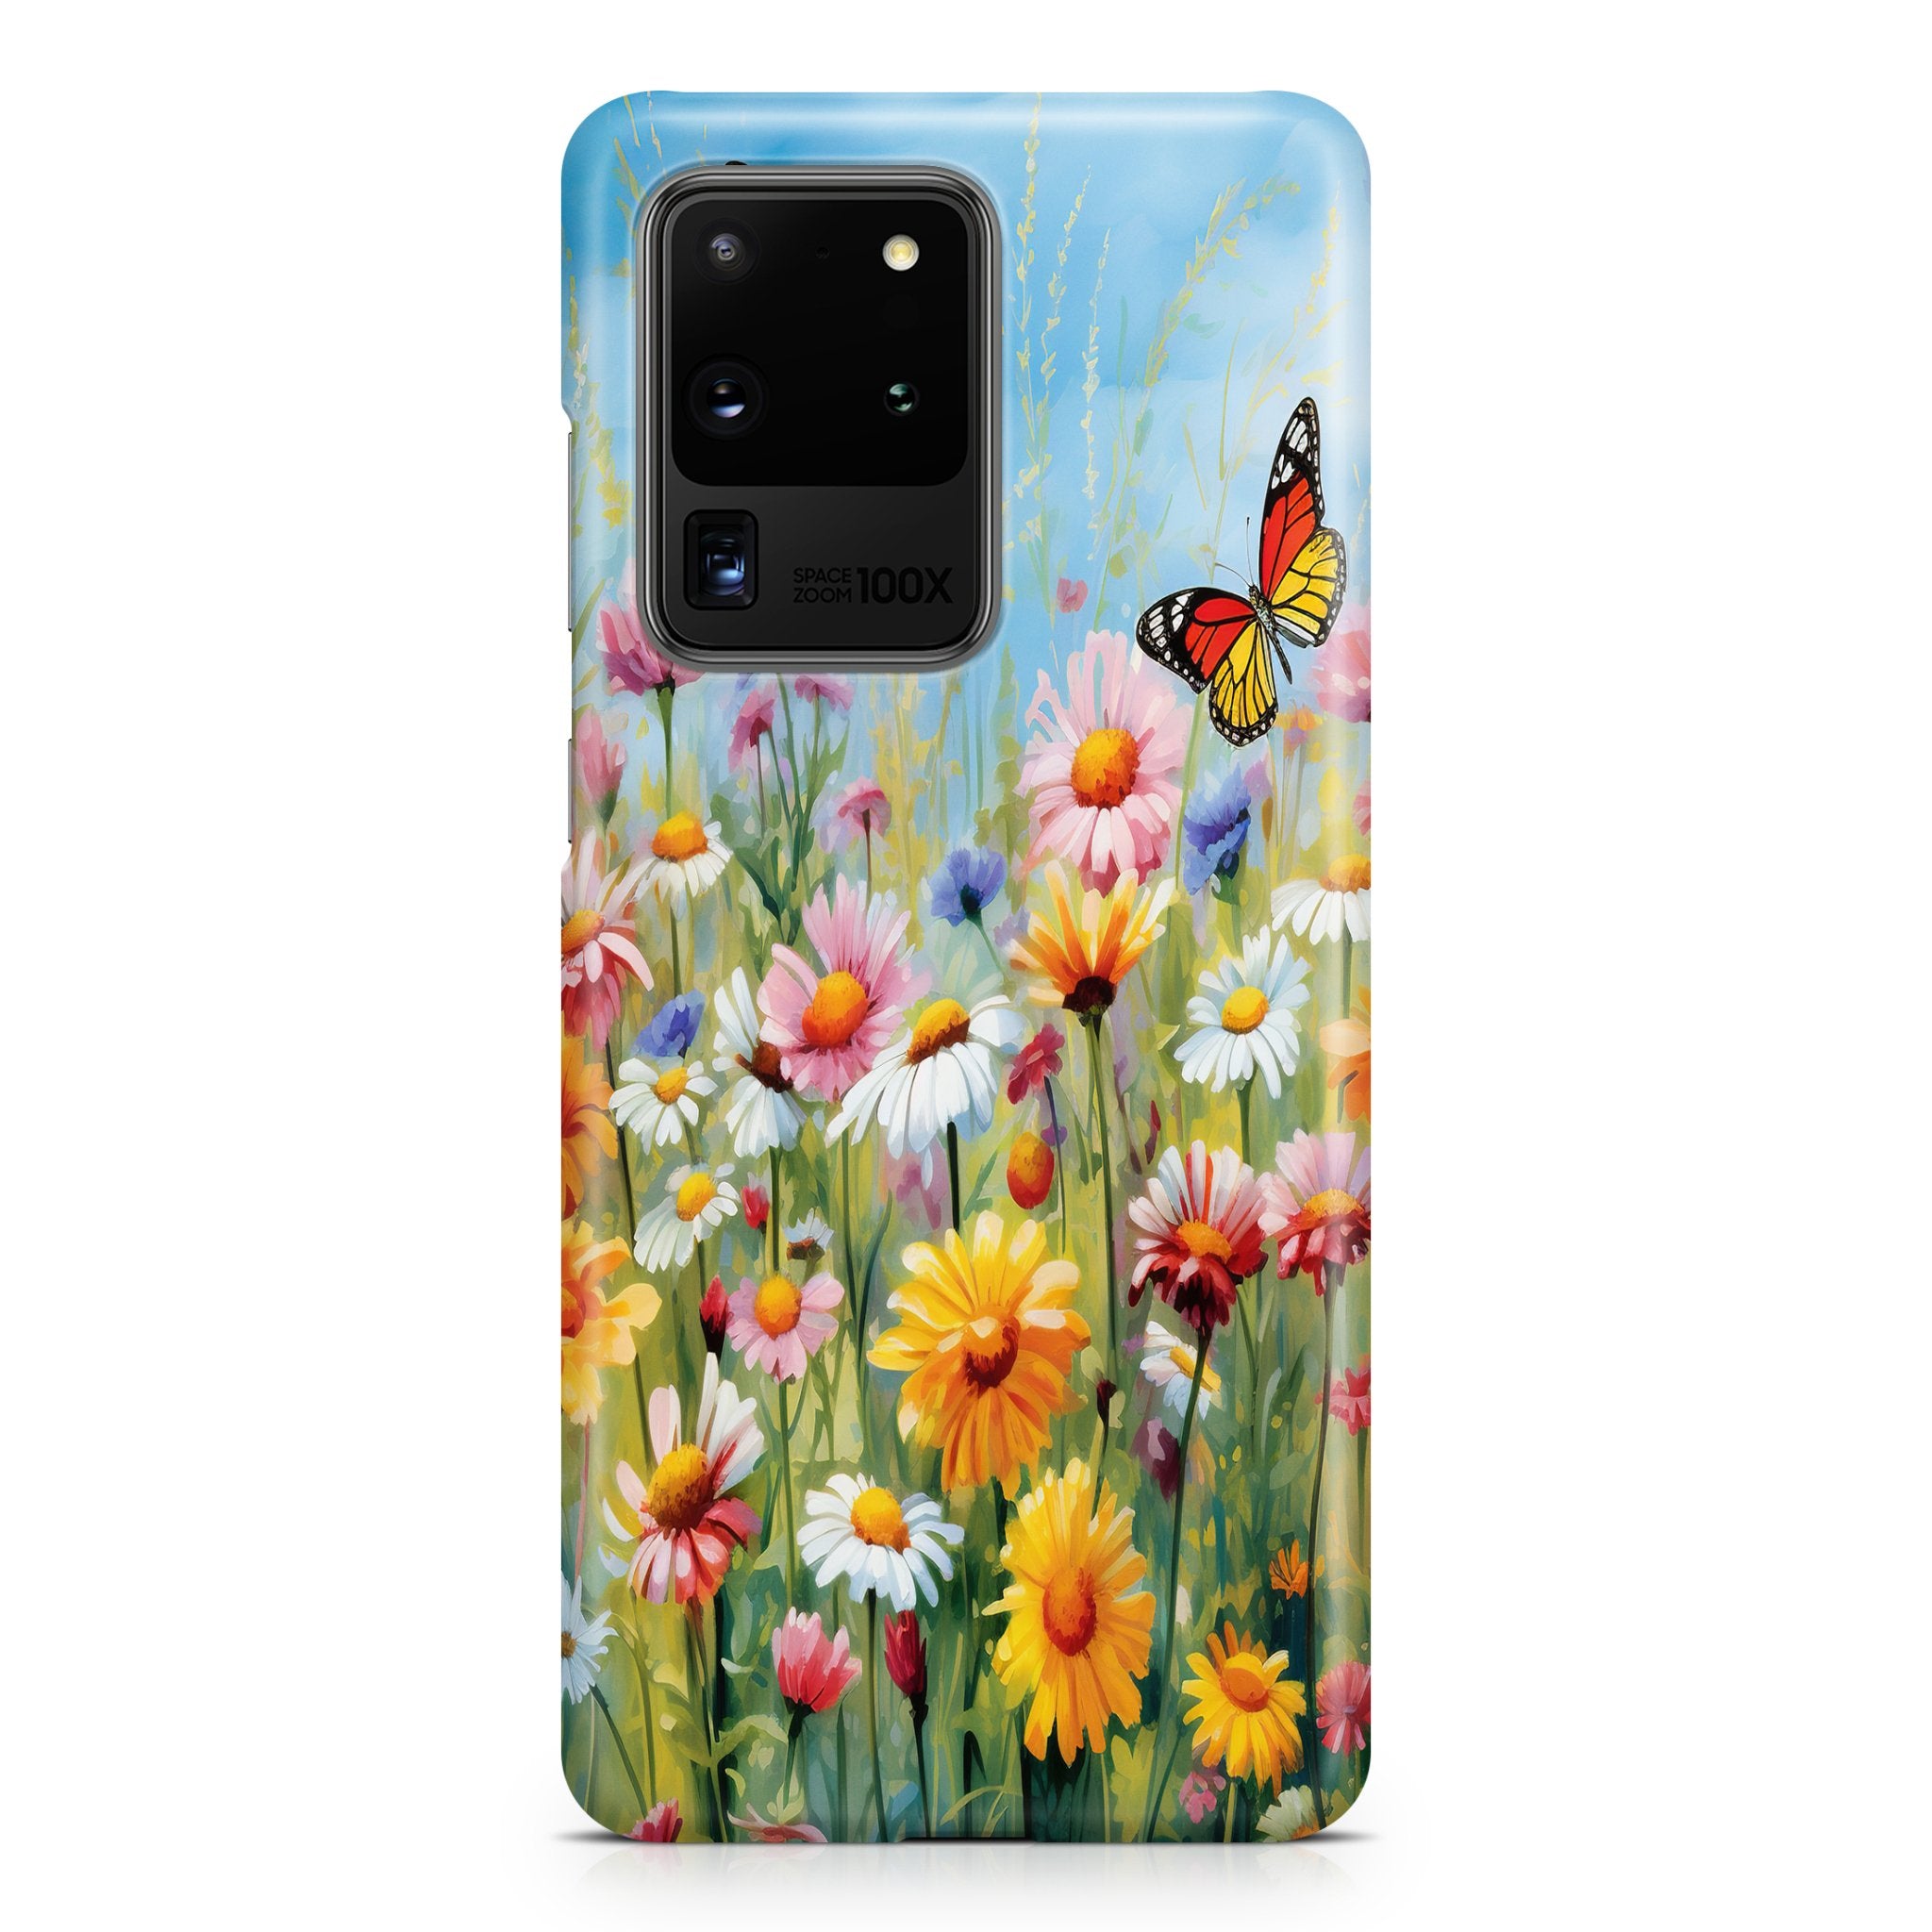 Spring Blossom - Samsung phone case designs by CaseSwagger